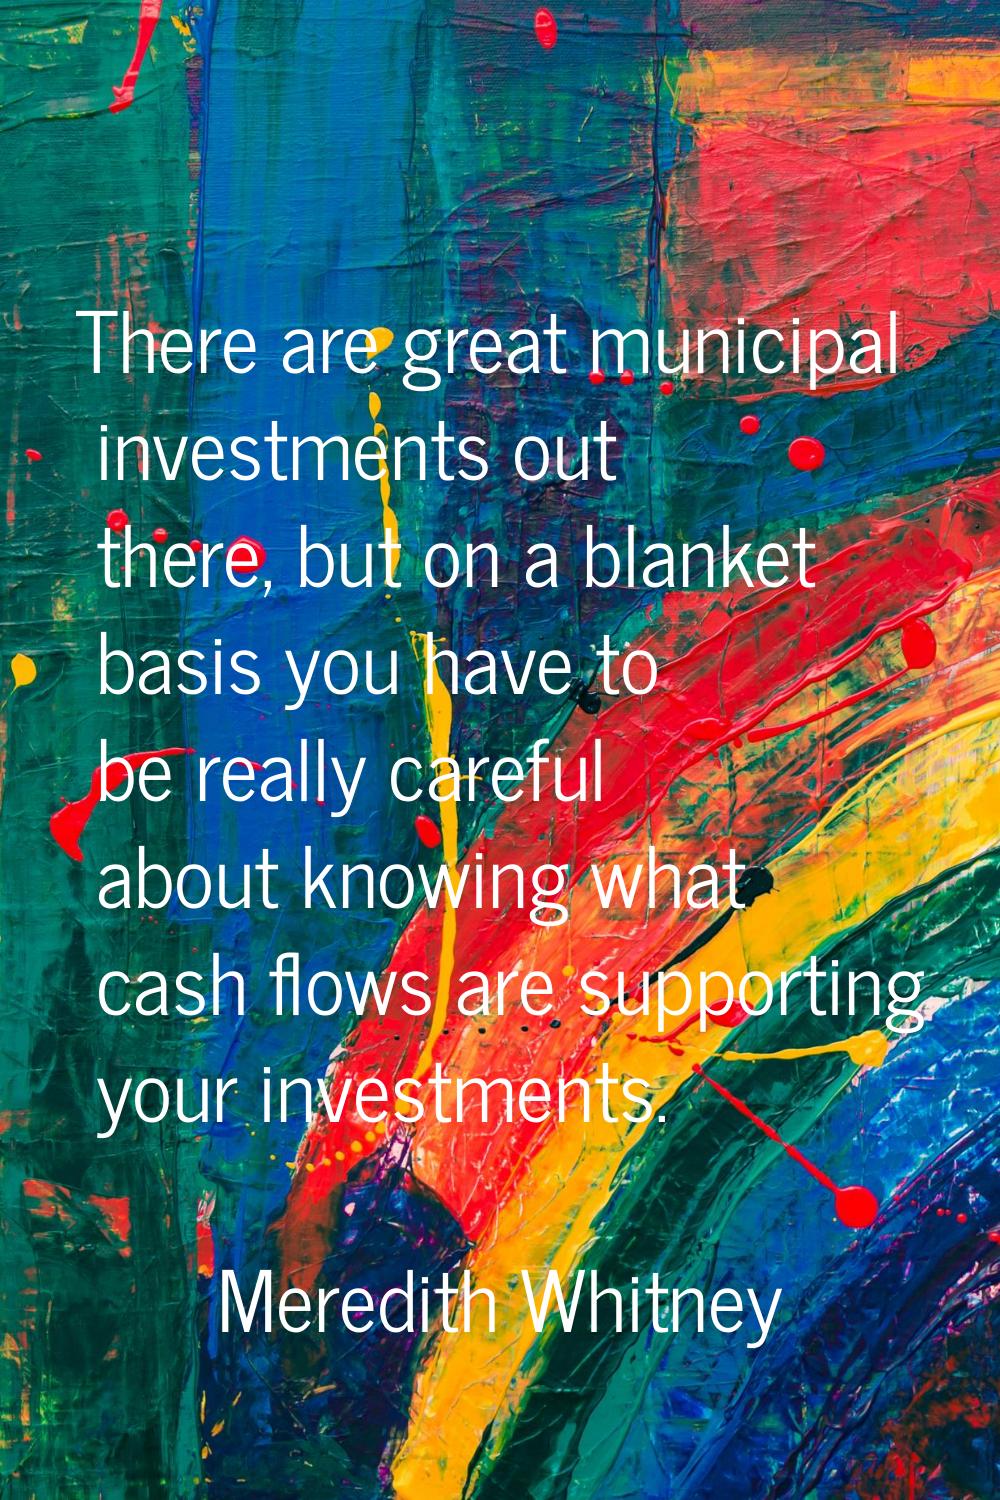 There are great municipal investments out there, but on a blanket basis you have to be really caref